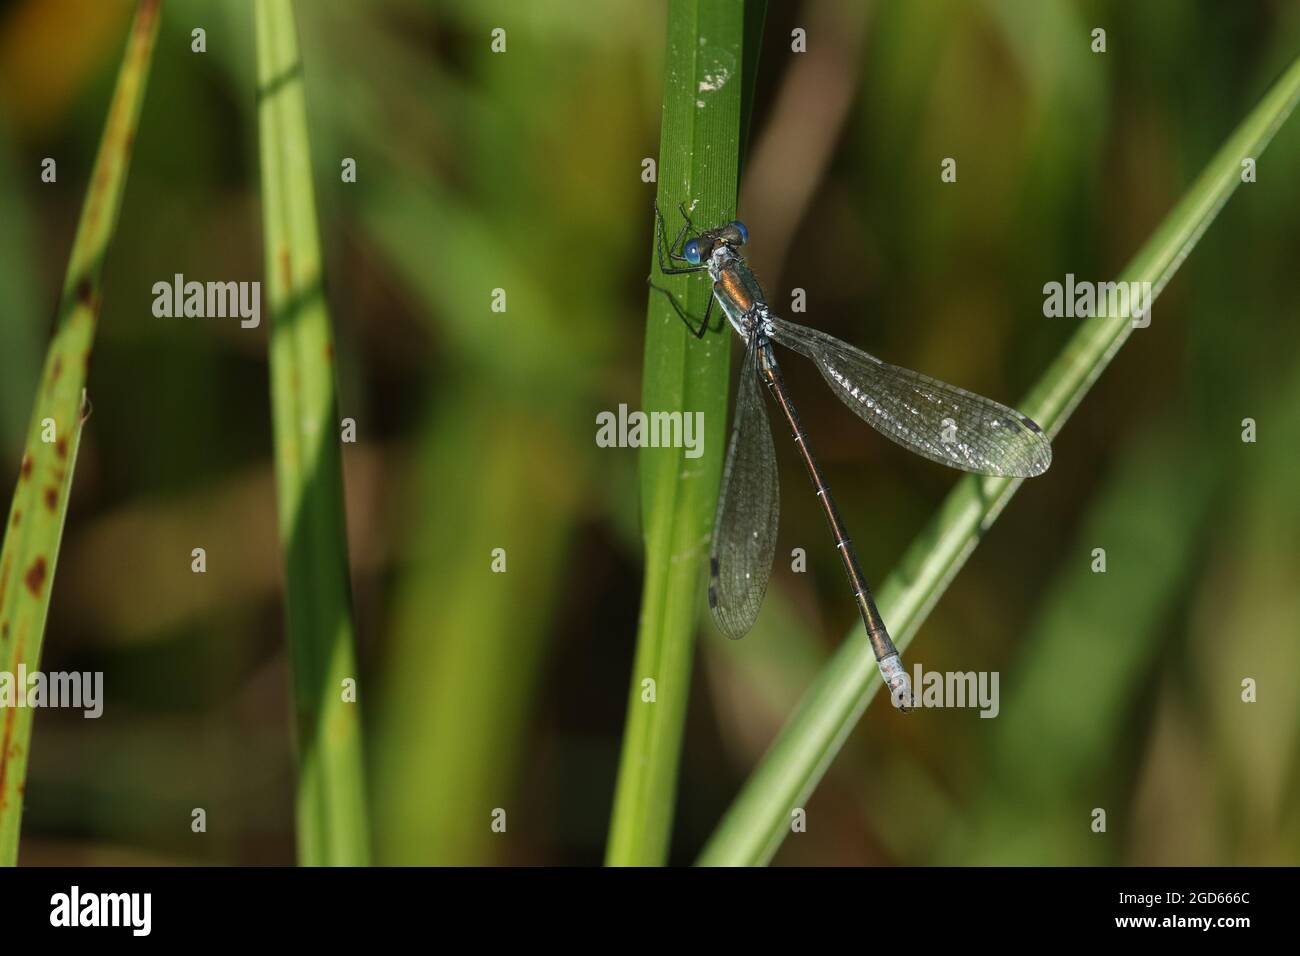 A rare Scarce Emerald Damselfly, Lestes dryas, perching on a reed at the edge of a stream in the UK. Stock Photo